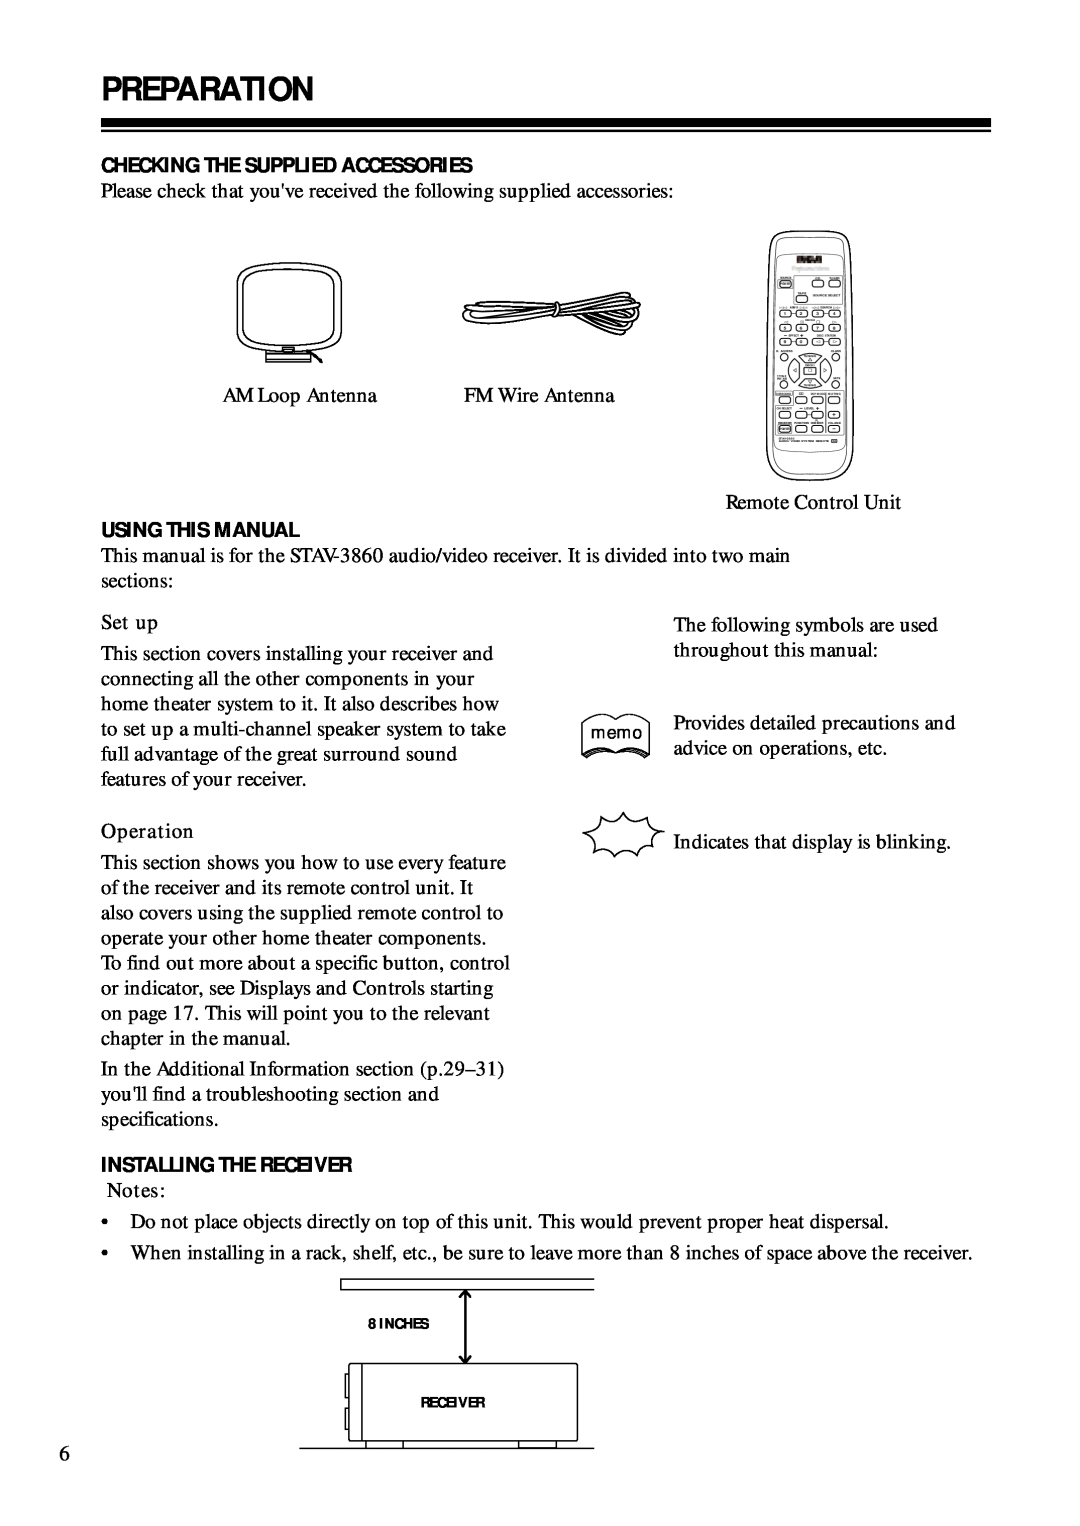 RCA STAV3860 owner manual Preparation, Checking The Supplied Accessories, Using This Manual, Installing The Receiver 